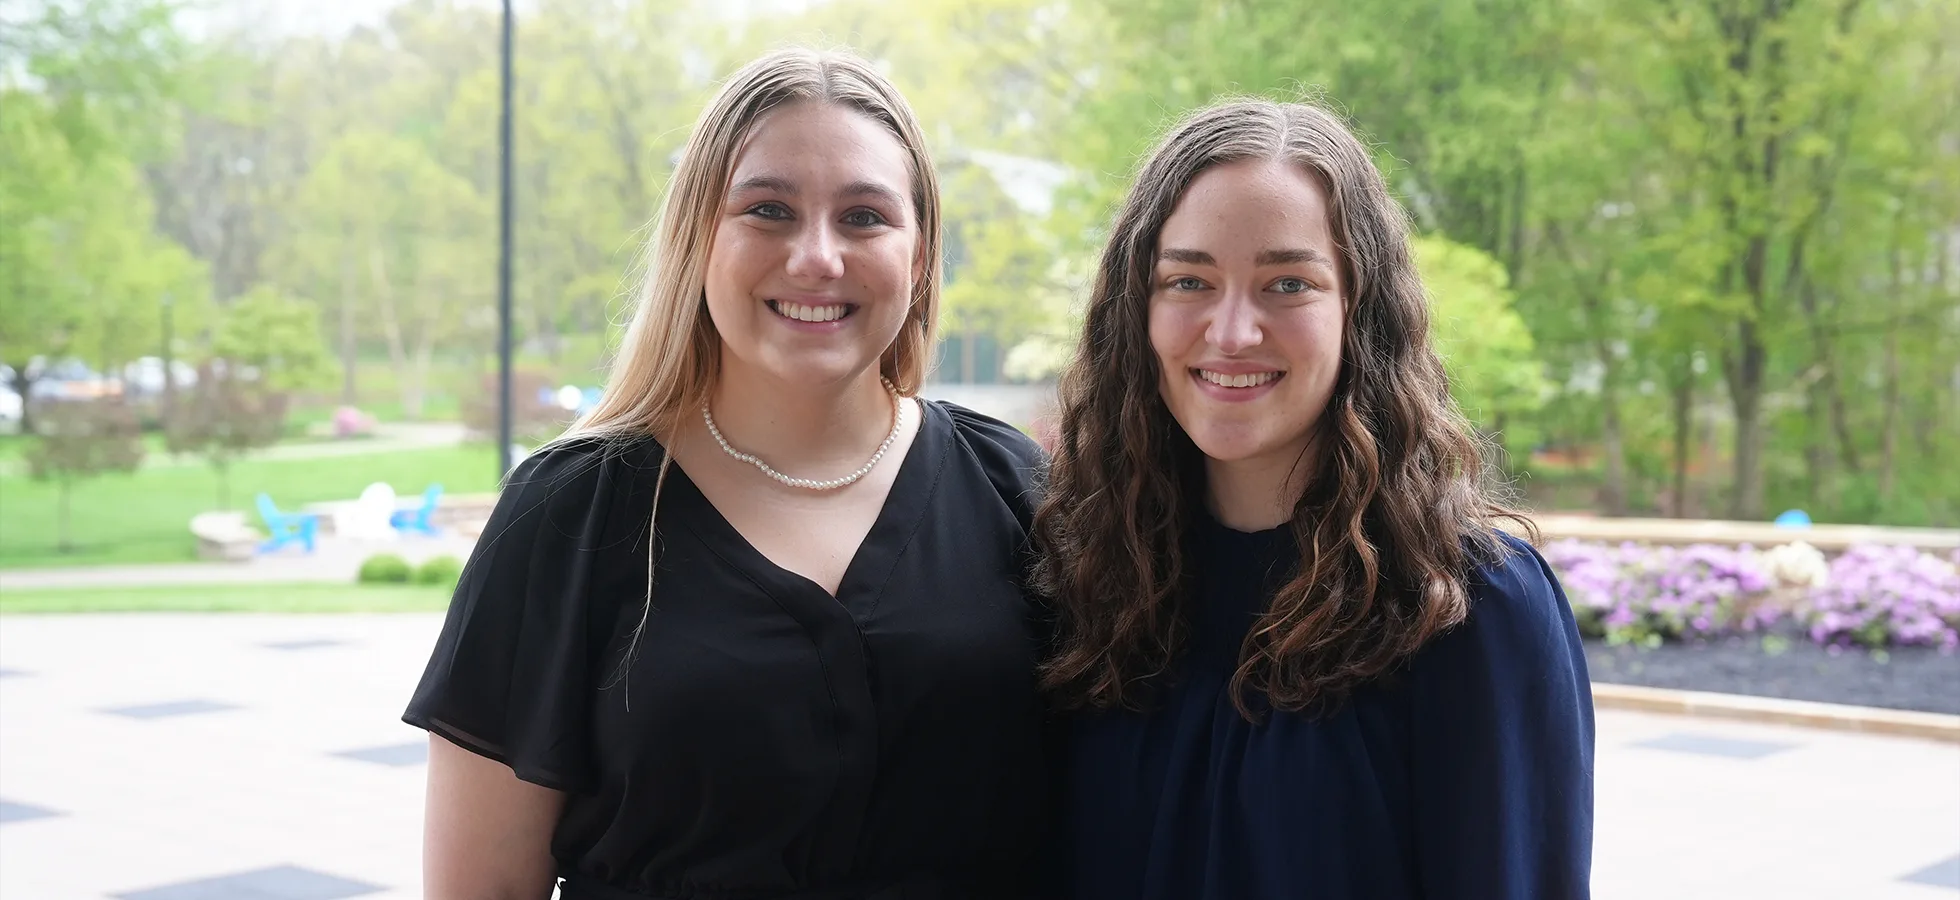 Assumption University has announced that Emily Fasteson, a Theology and Mathematics double major, has been named Valedictorian, and Shaeleigh Boynton, a Psychology major with a concentration in child and adolescent development, has been named Salutatorian for the Class of 2024. 